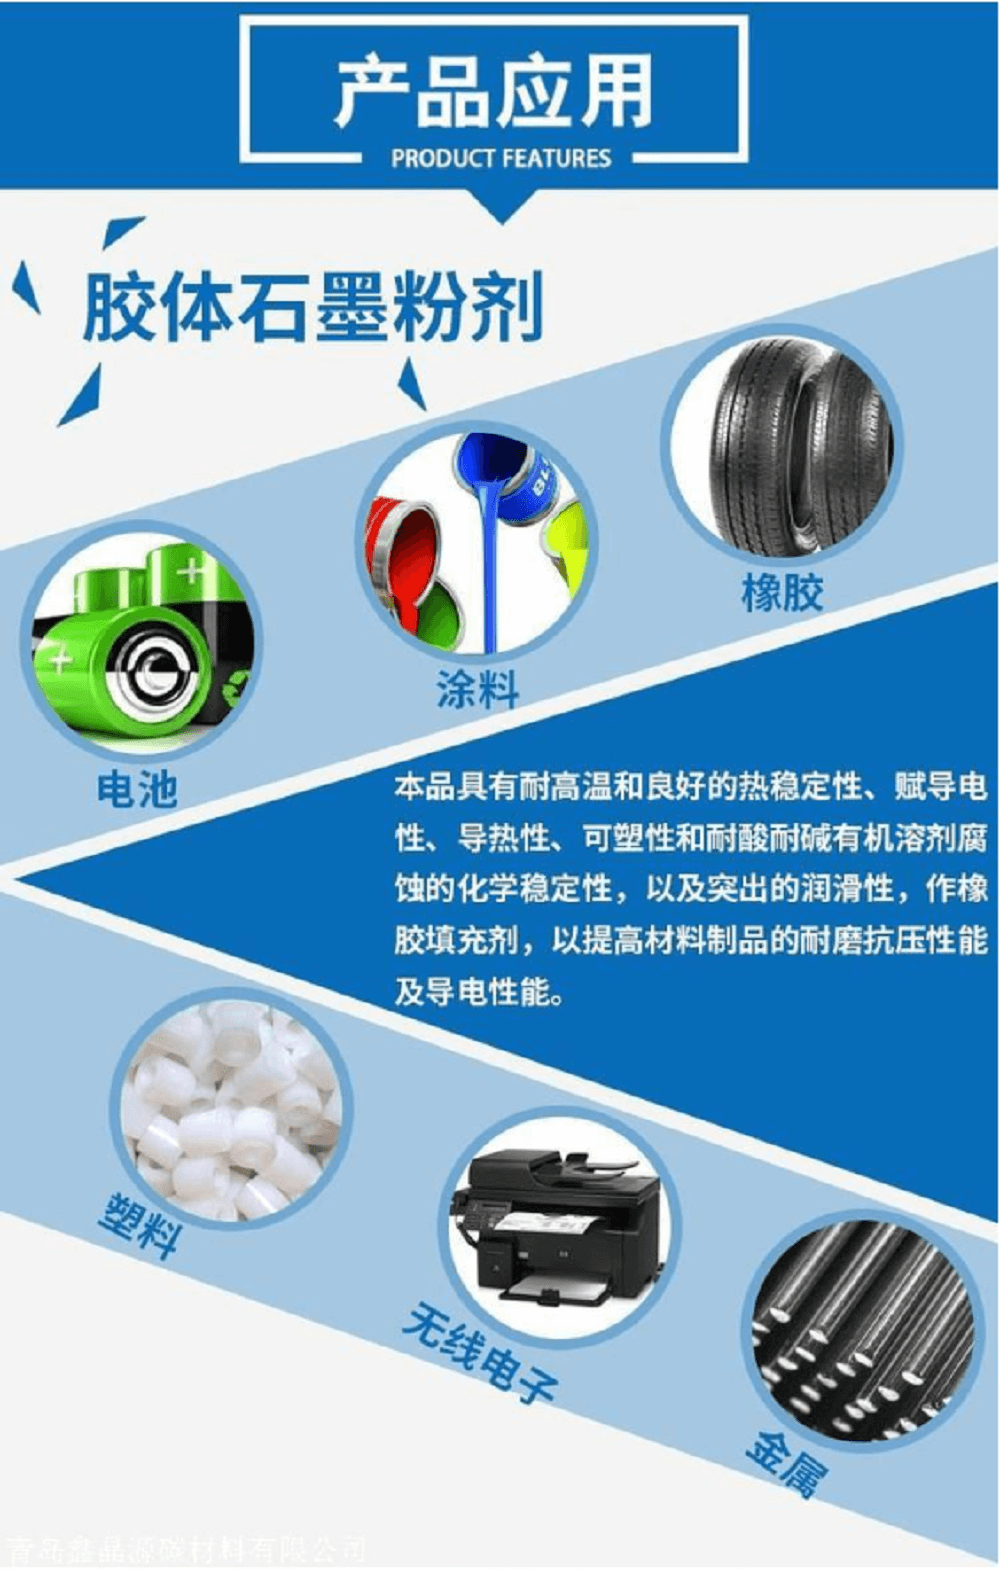 Application of Lithium Ion Battery Cathode Material Products